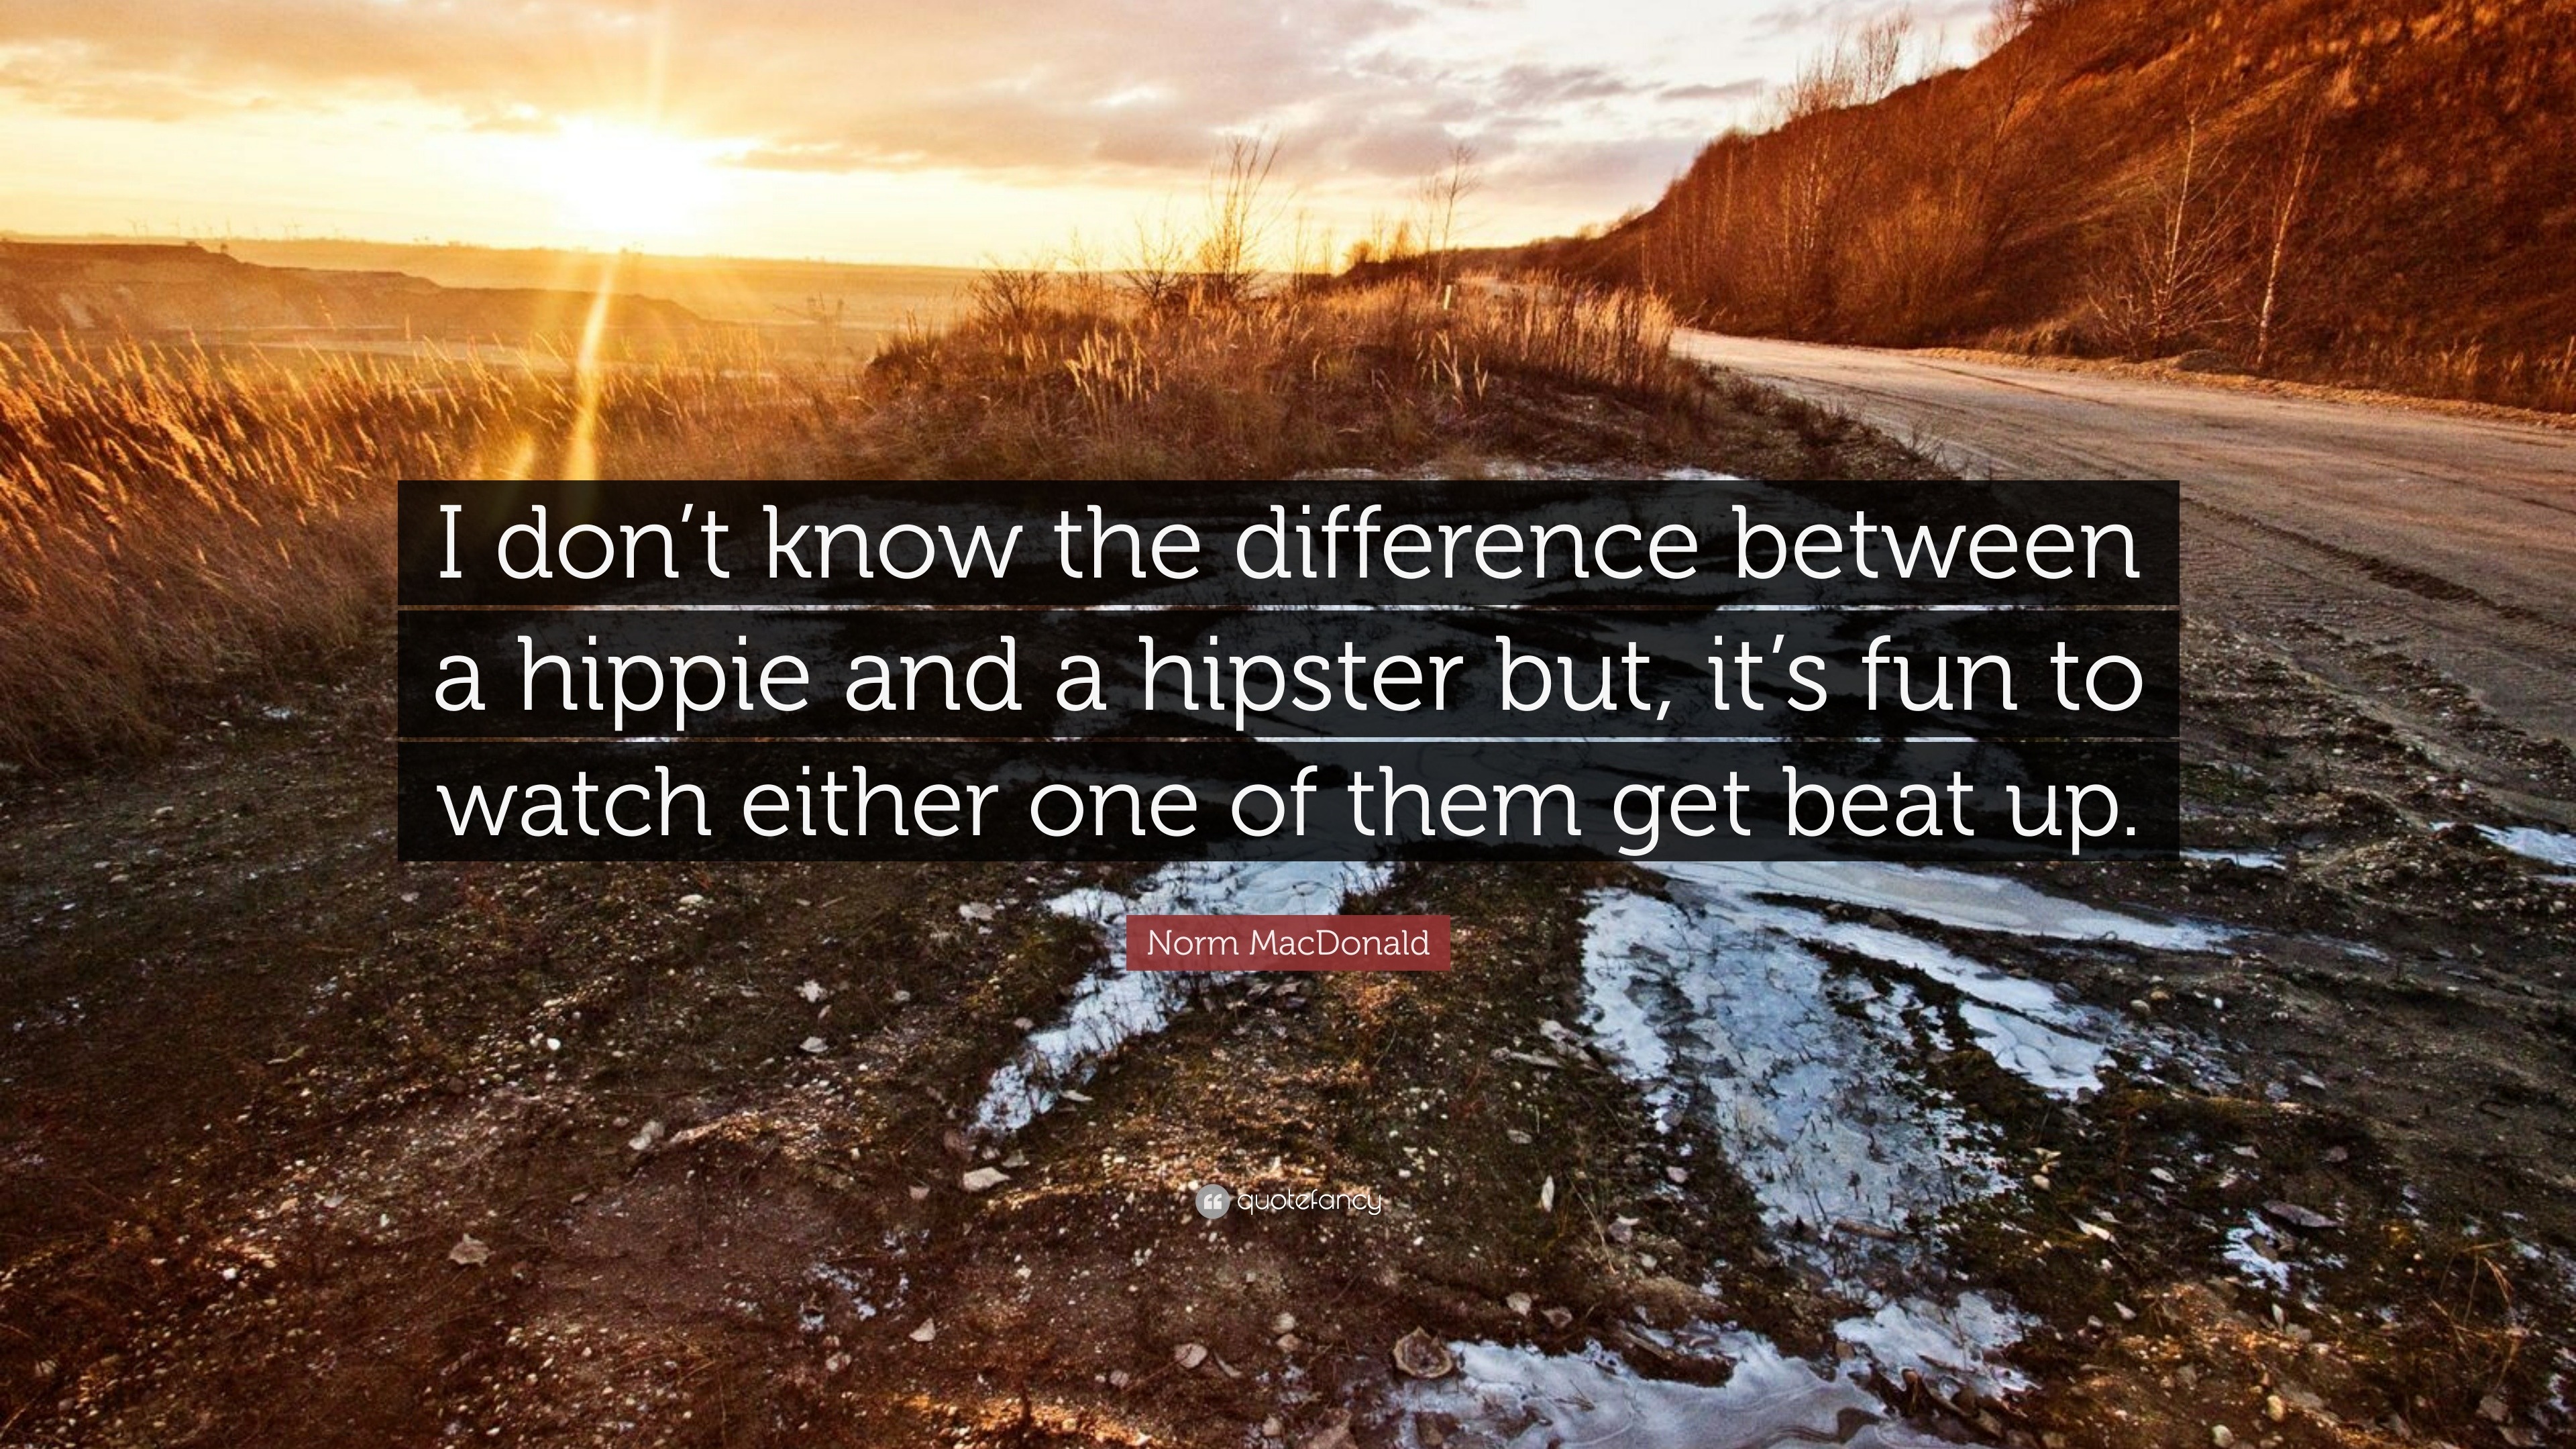 Norm MacDonald Quote: “I don't know the difference between a